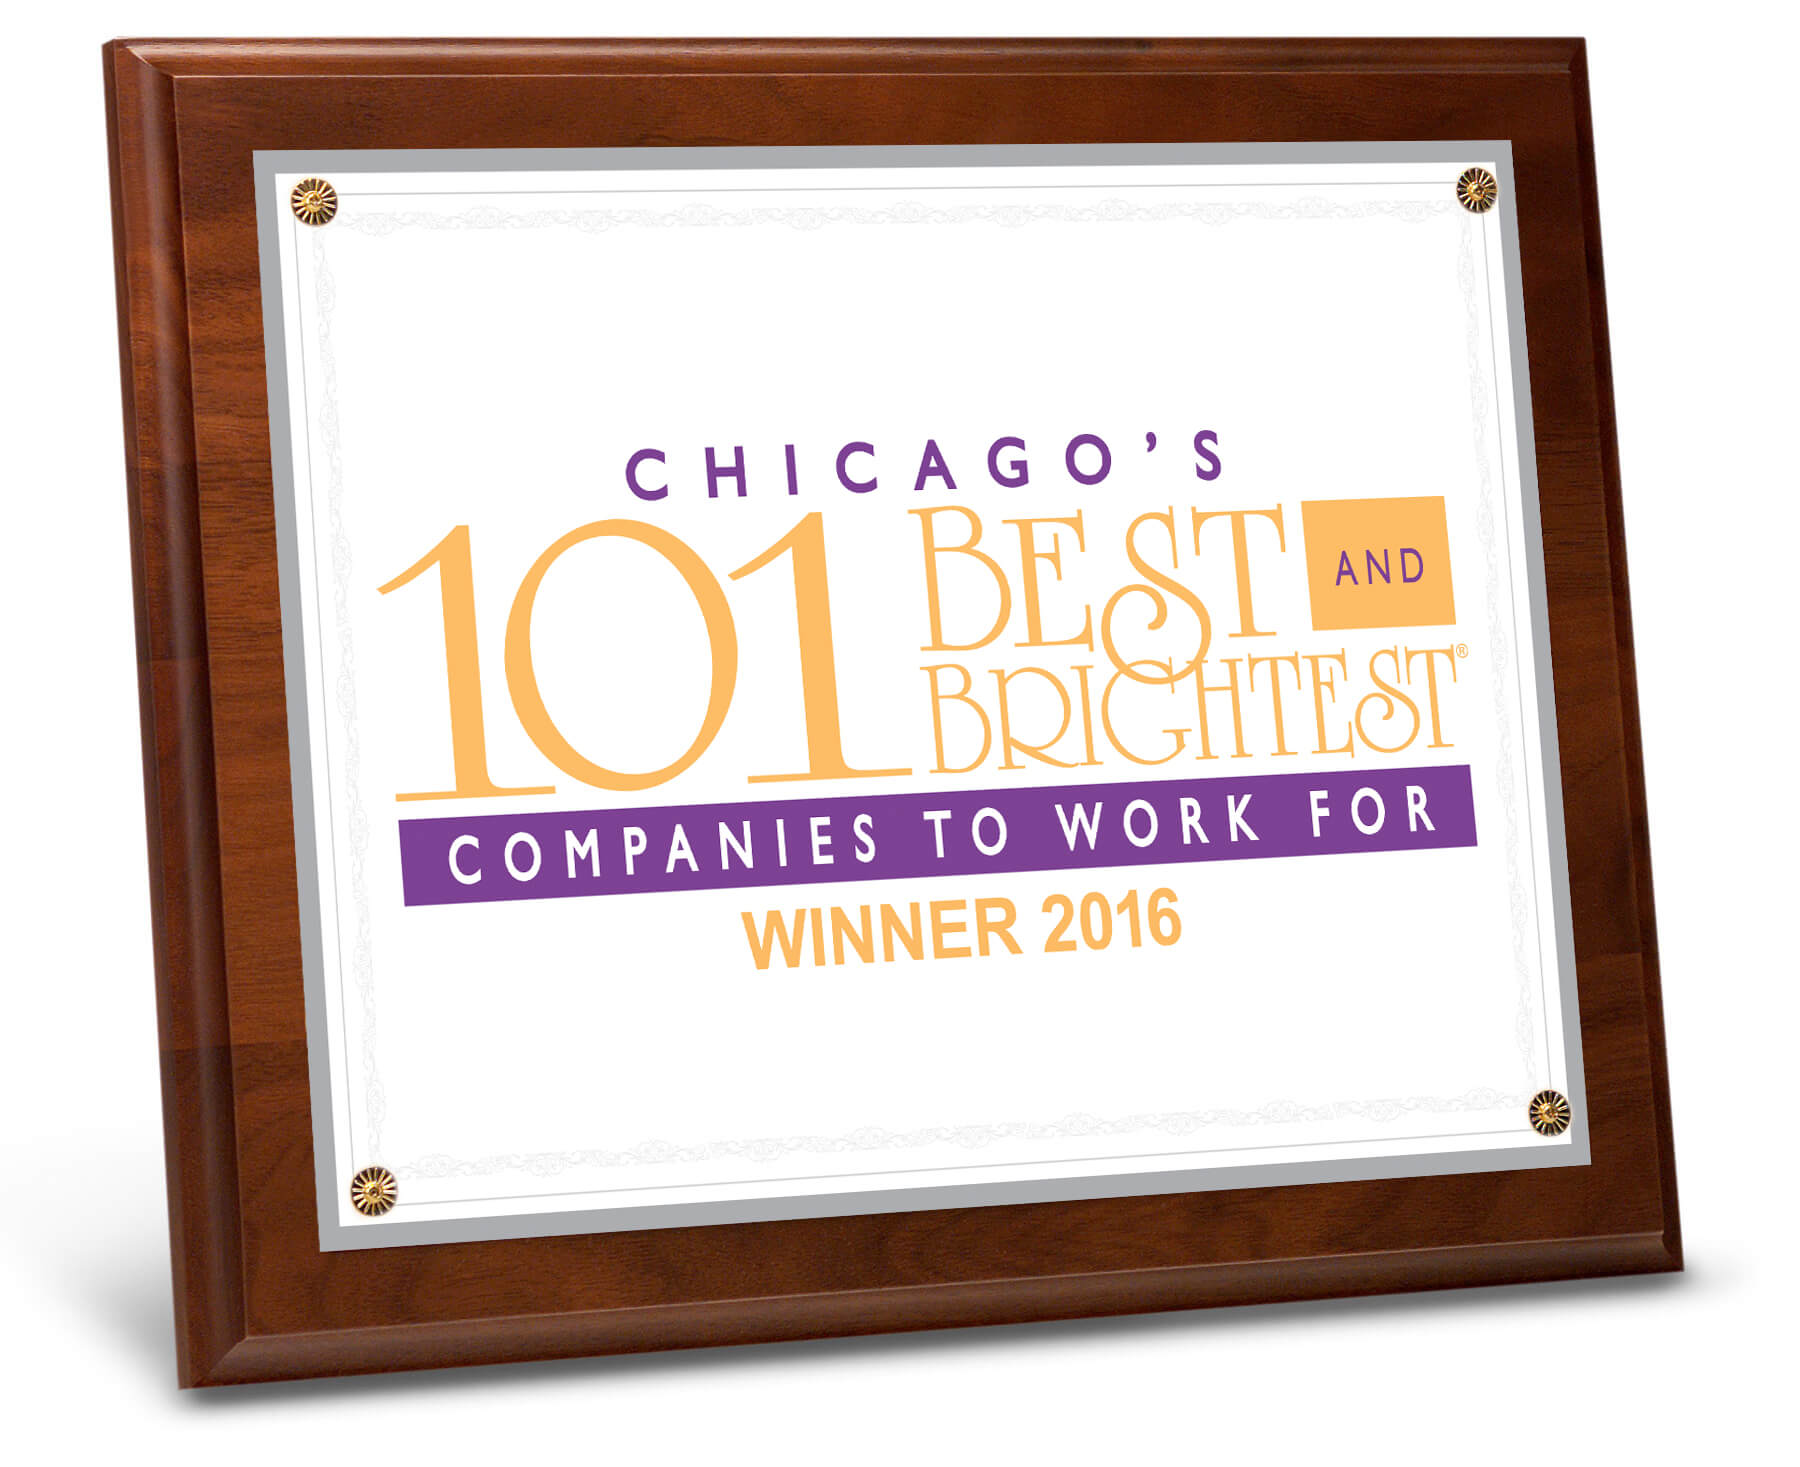 RoyalCyber- Chicago's 101 Best and Brightest Companies